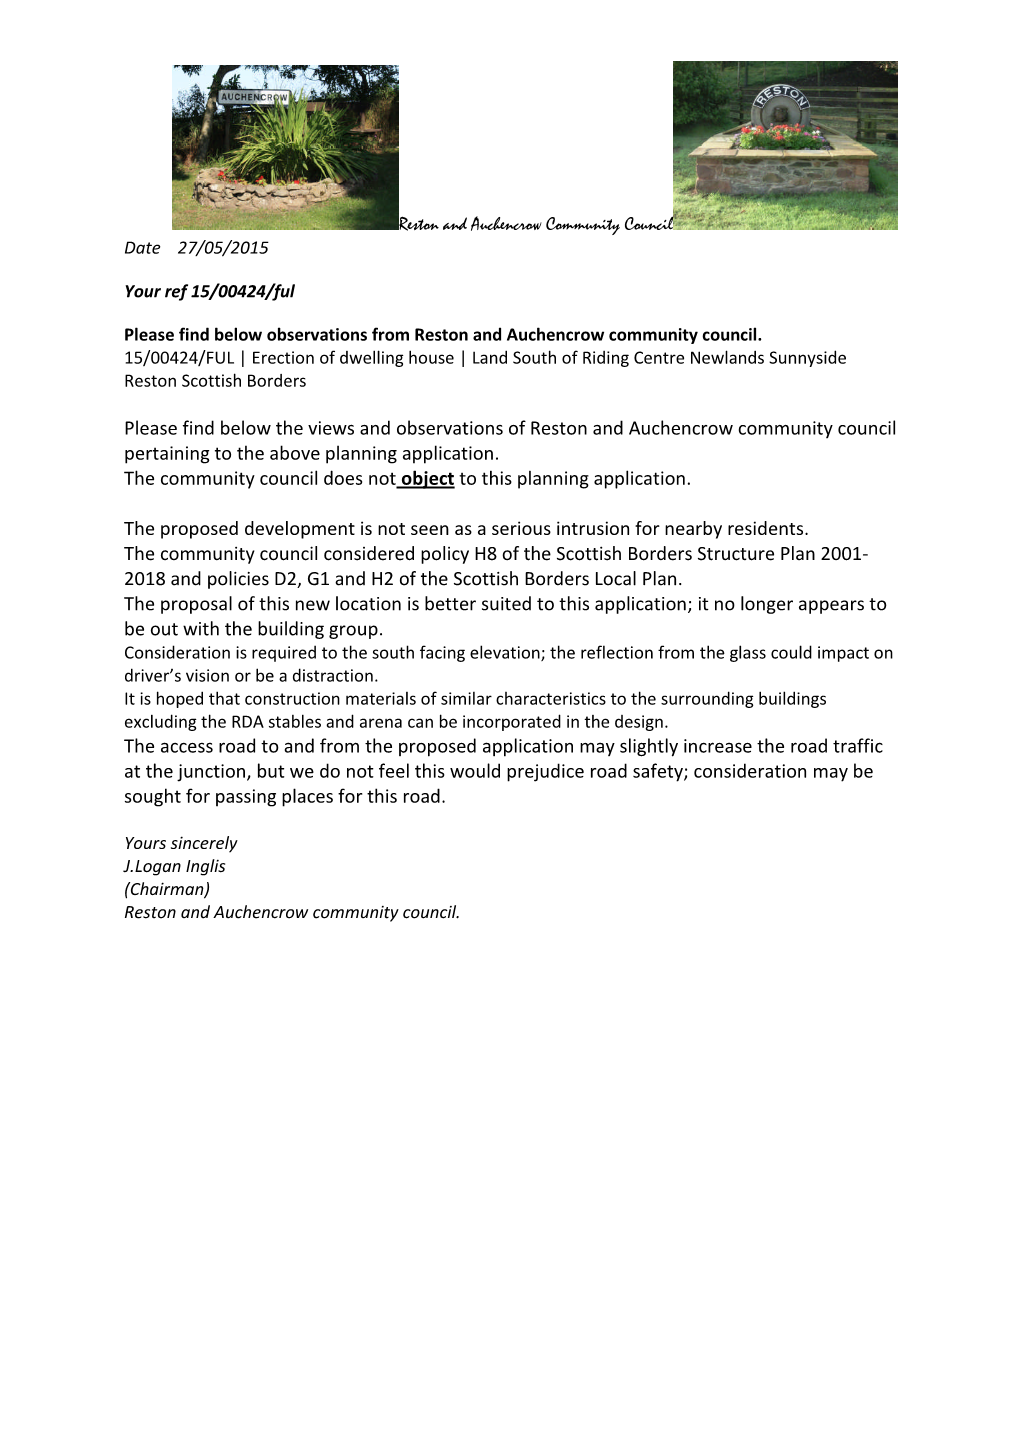 Please Find Below the Views and Observations of Reston and Auchencrow Community Council Pertaining to the Above Planning Application